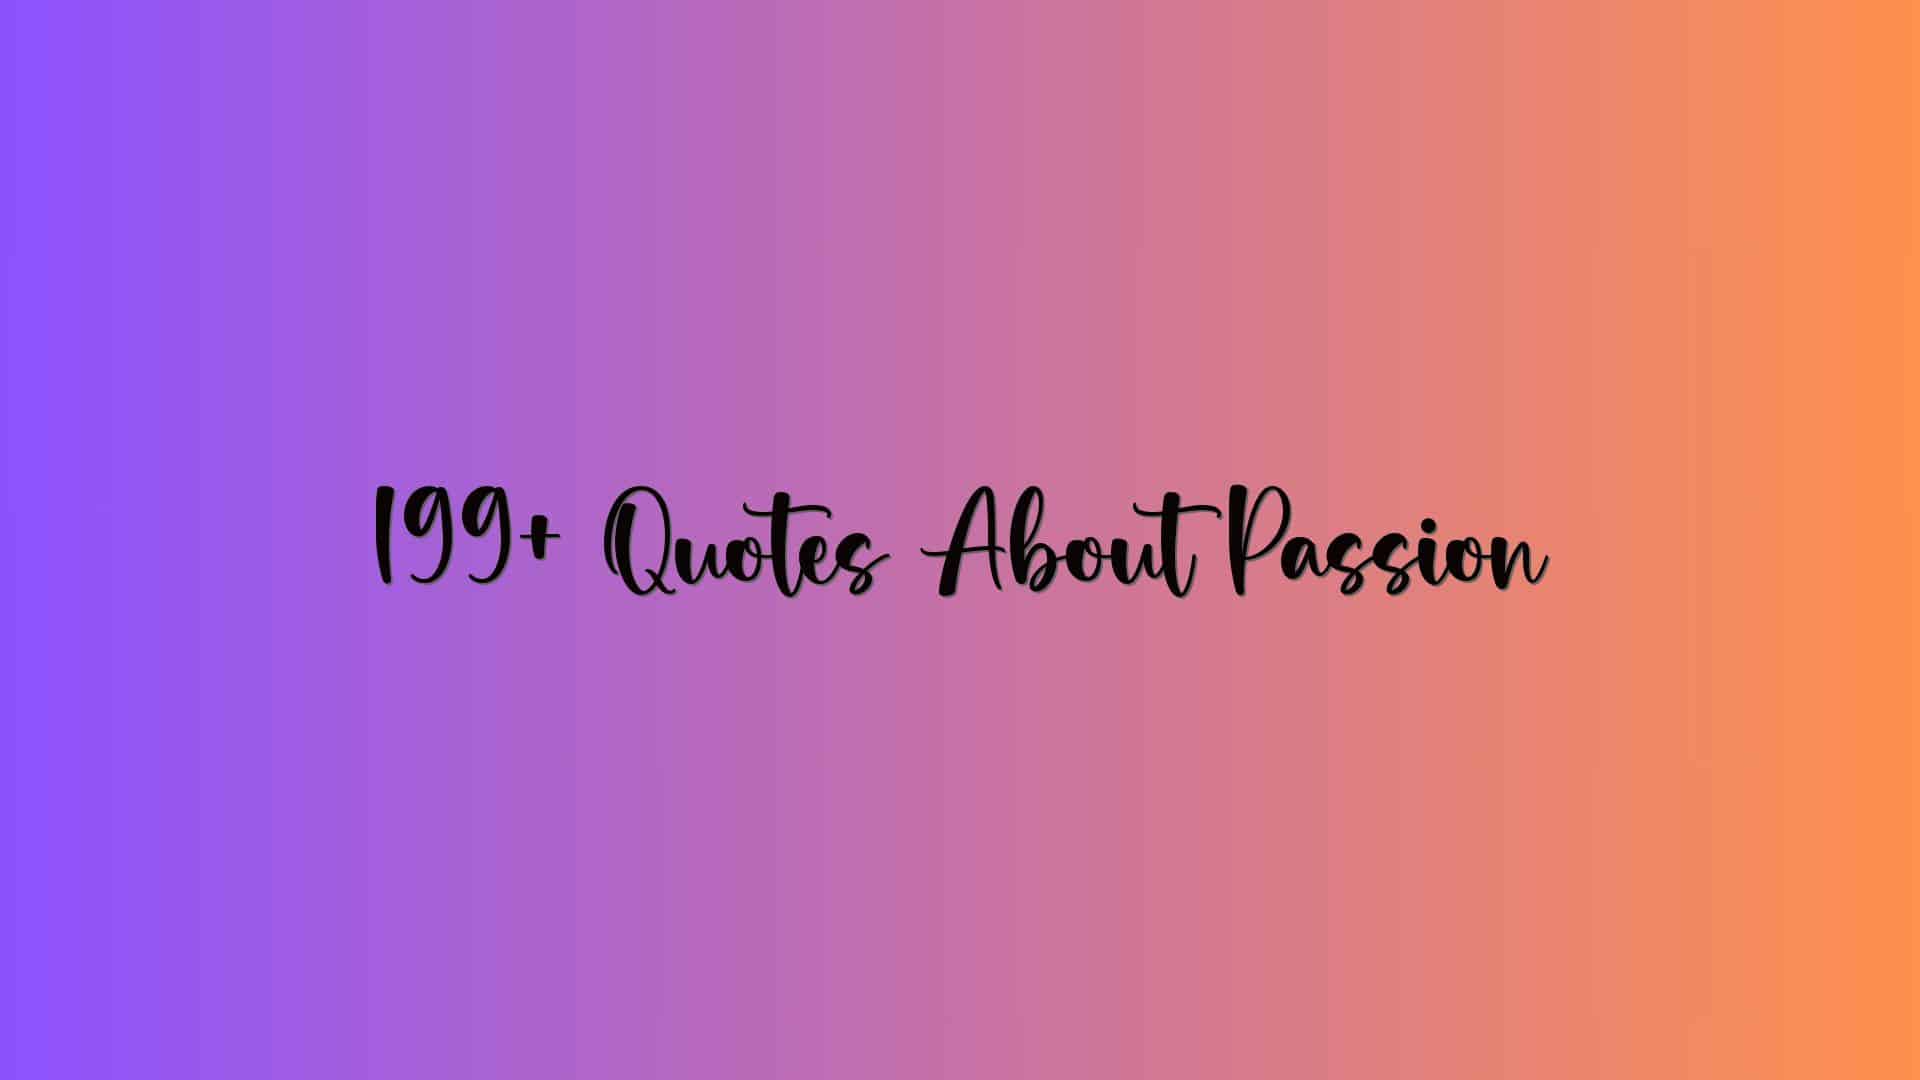 199+ Quotes About Passion